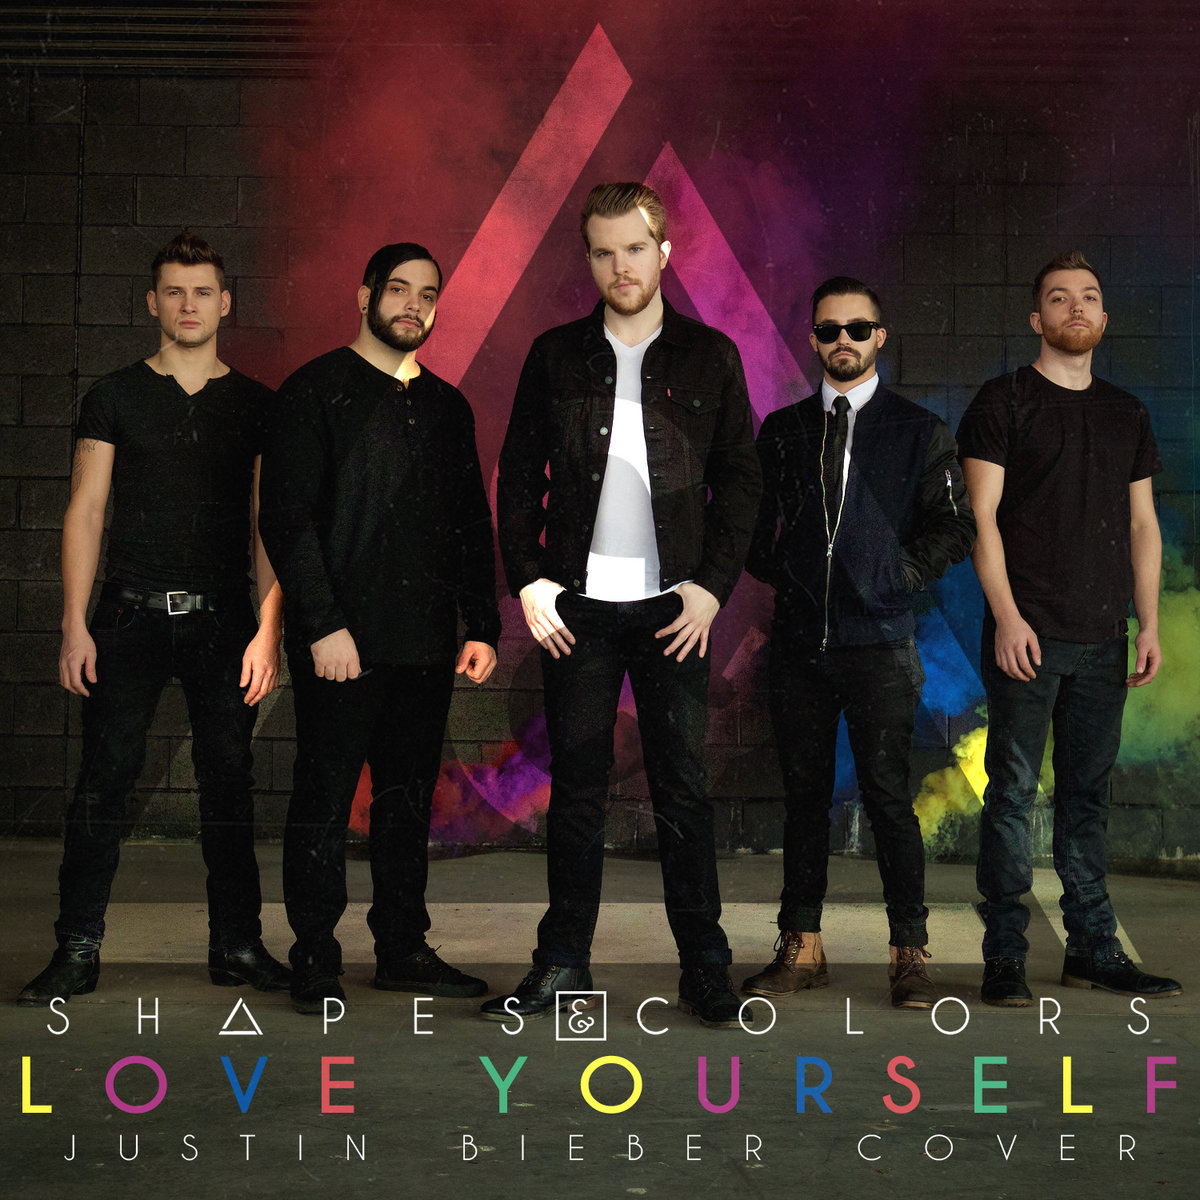 Bieber love yourself song free download mp3